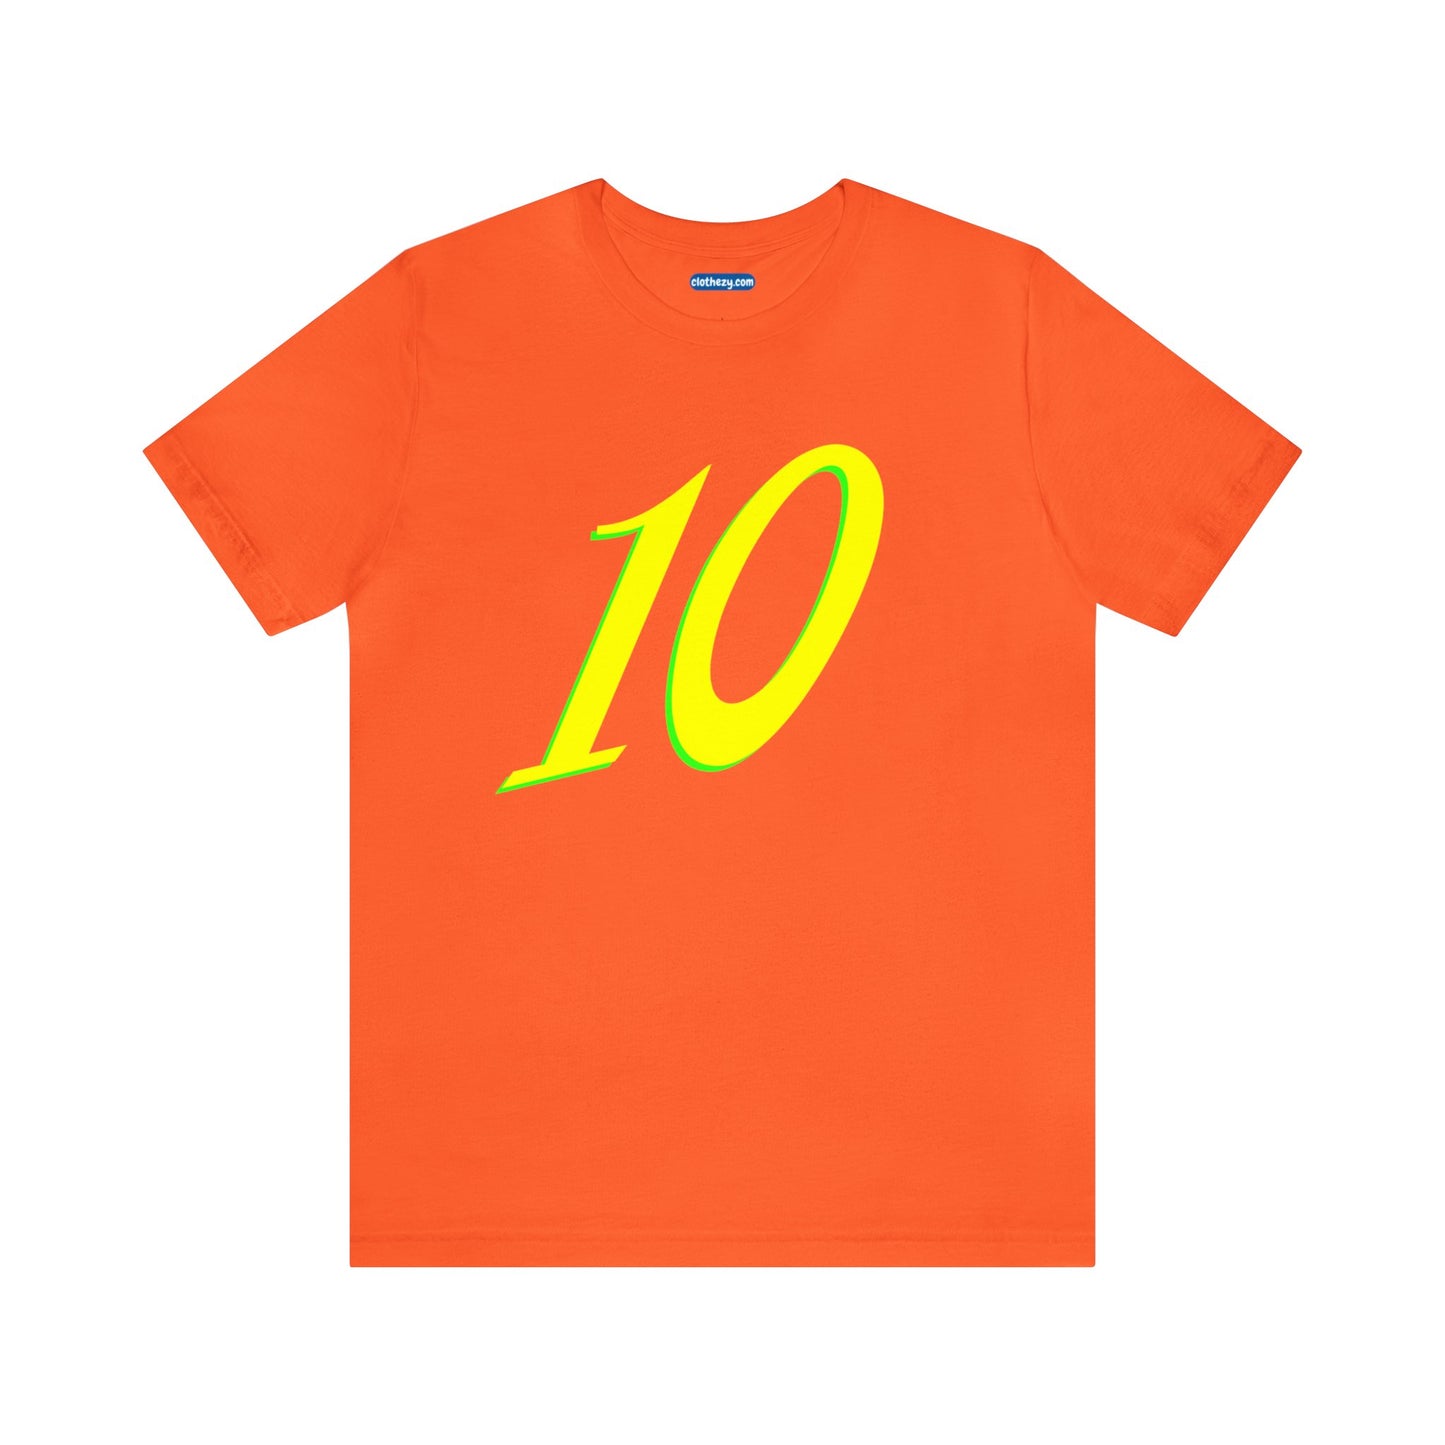 Number 10 Design - Soft Cotton Tee for birthdays and celebrations, Gift for friends and family, Multiple Options by clothezy.com in Orange Size Small - Buy Now